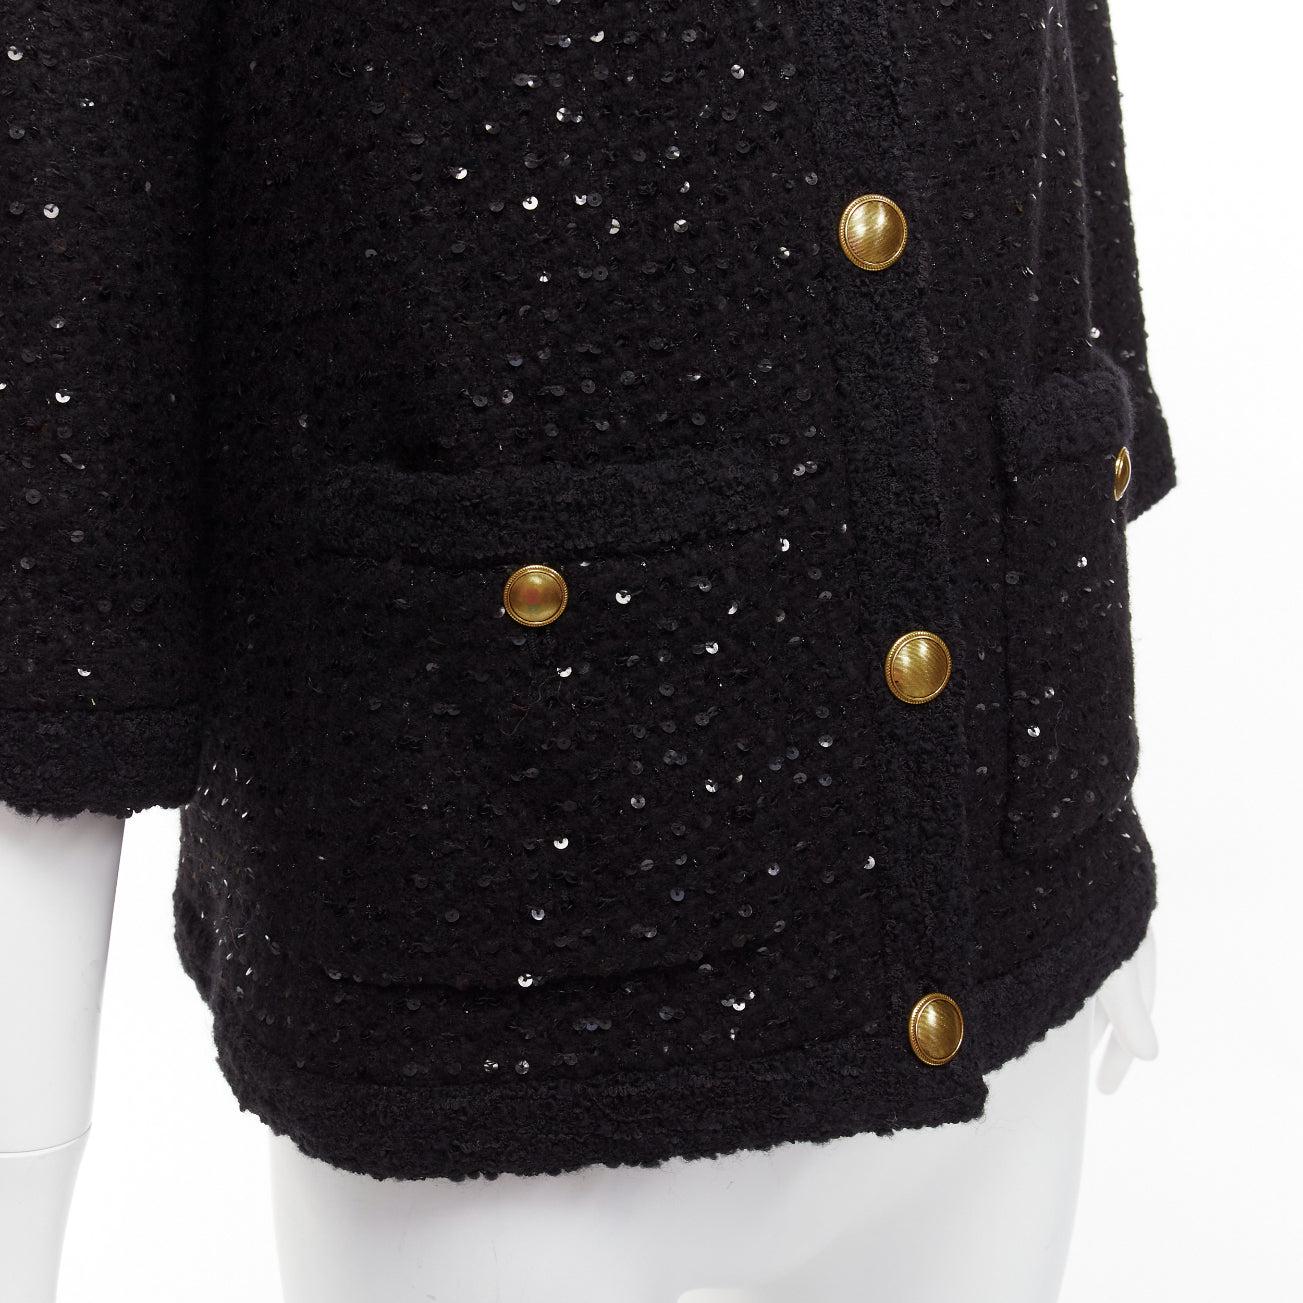 SAINT LAURENT 2021 black wool sequinned tweed gold button jacket FR34 XS
Reference: AAWC/A00717
Brand: Saint Laurent
Designer: Anthony Vaccarello
Collection: 2021
Material: Wool, Blend
Color: Black, Gold
Pattern: Sequins
Closure: Button
Lining: